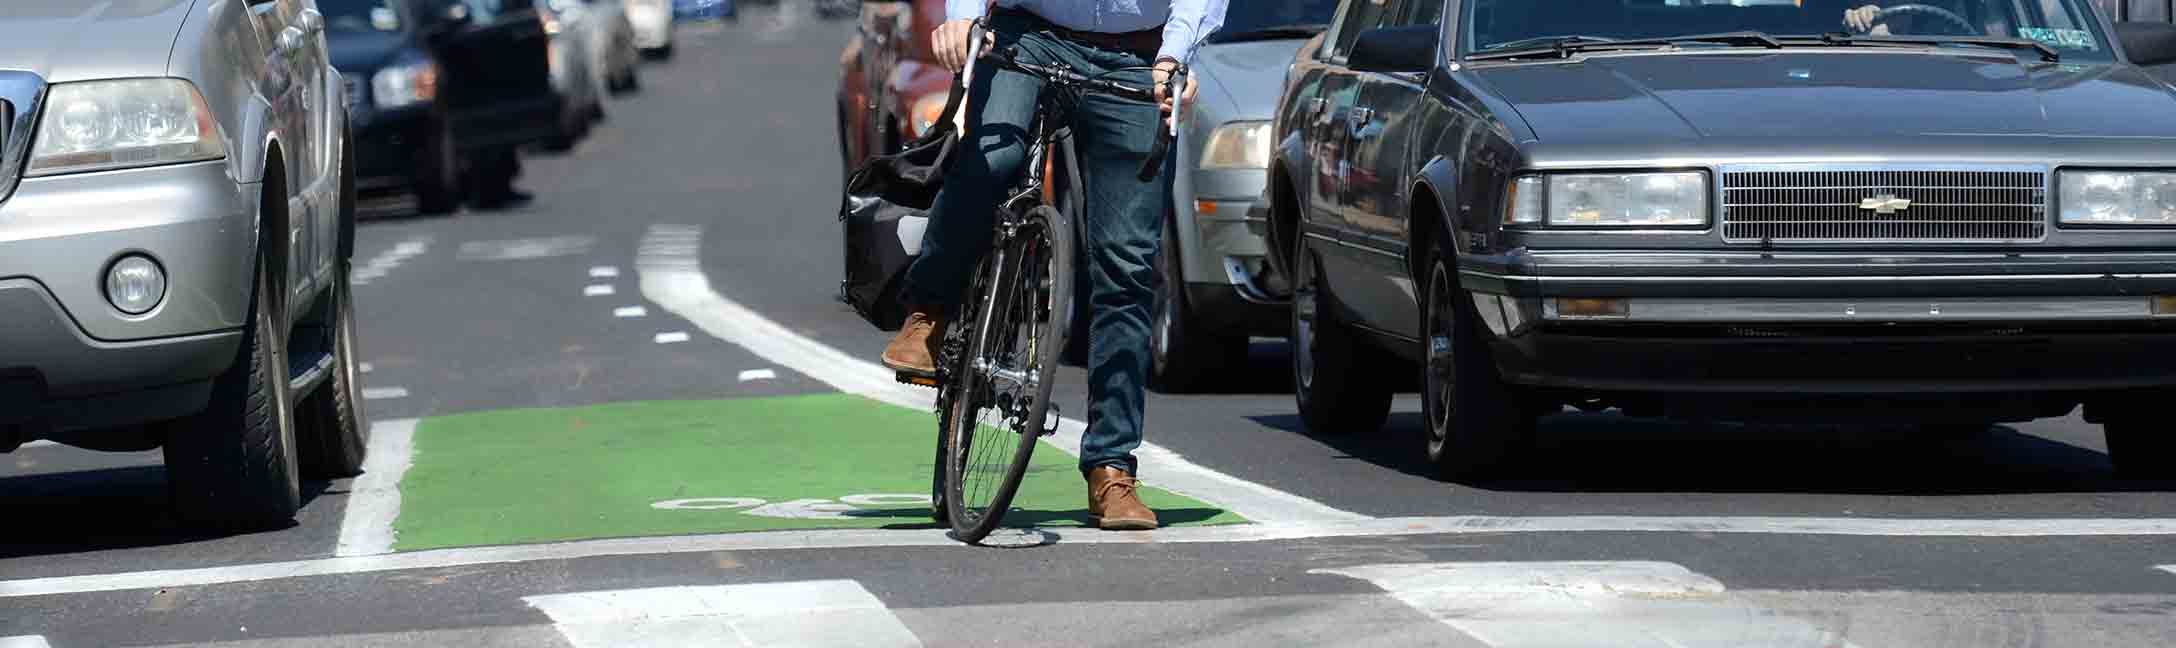 bicyclist waiting at intersection in marked bike lane